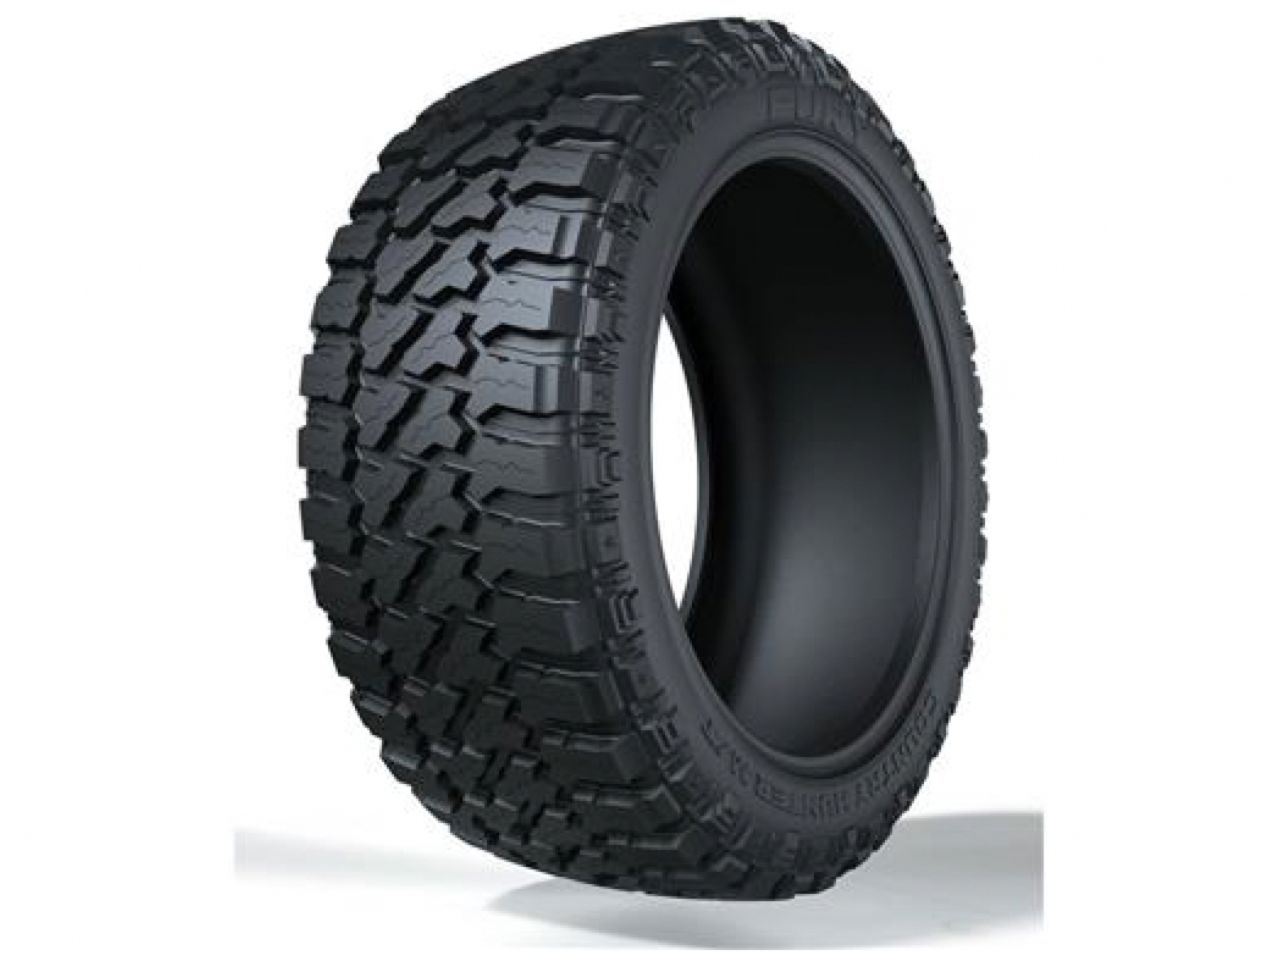 Fury Off Road 35x12.50R20 Tire, Country Hunter M/T